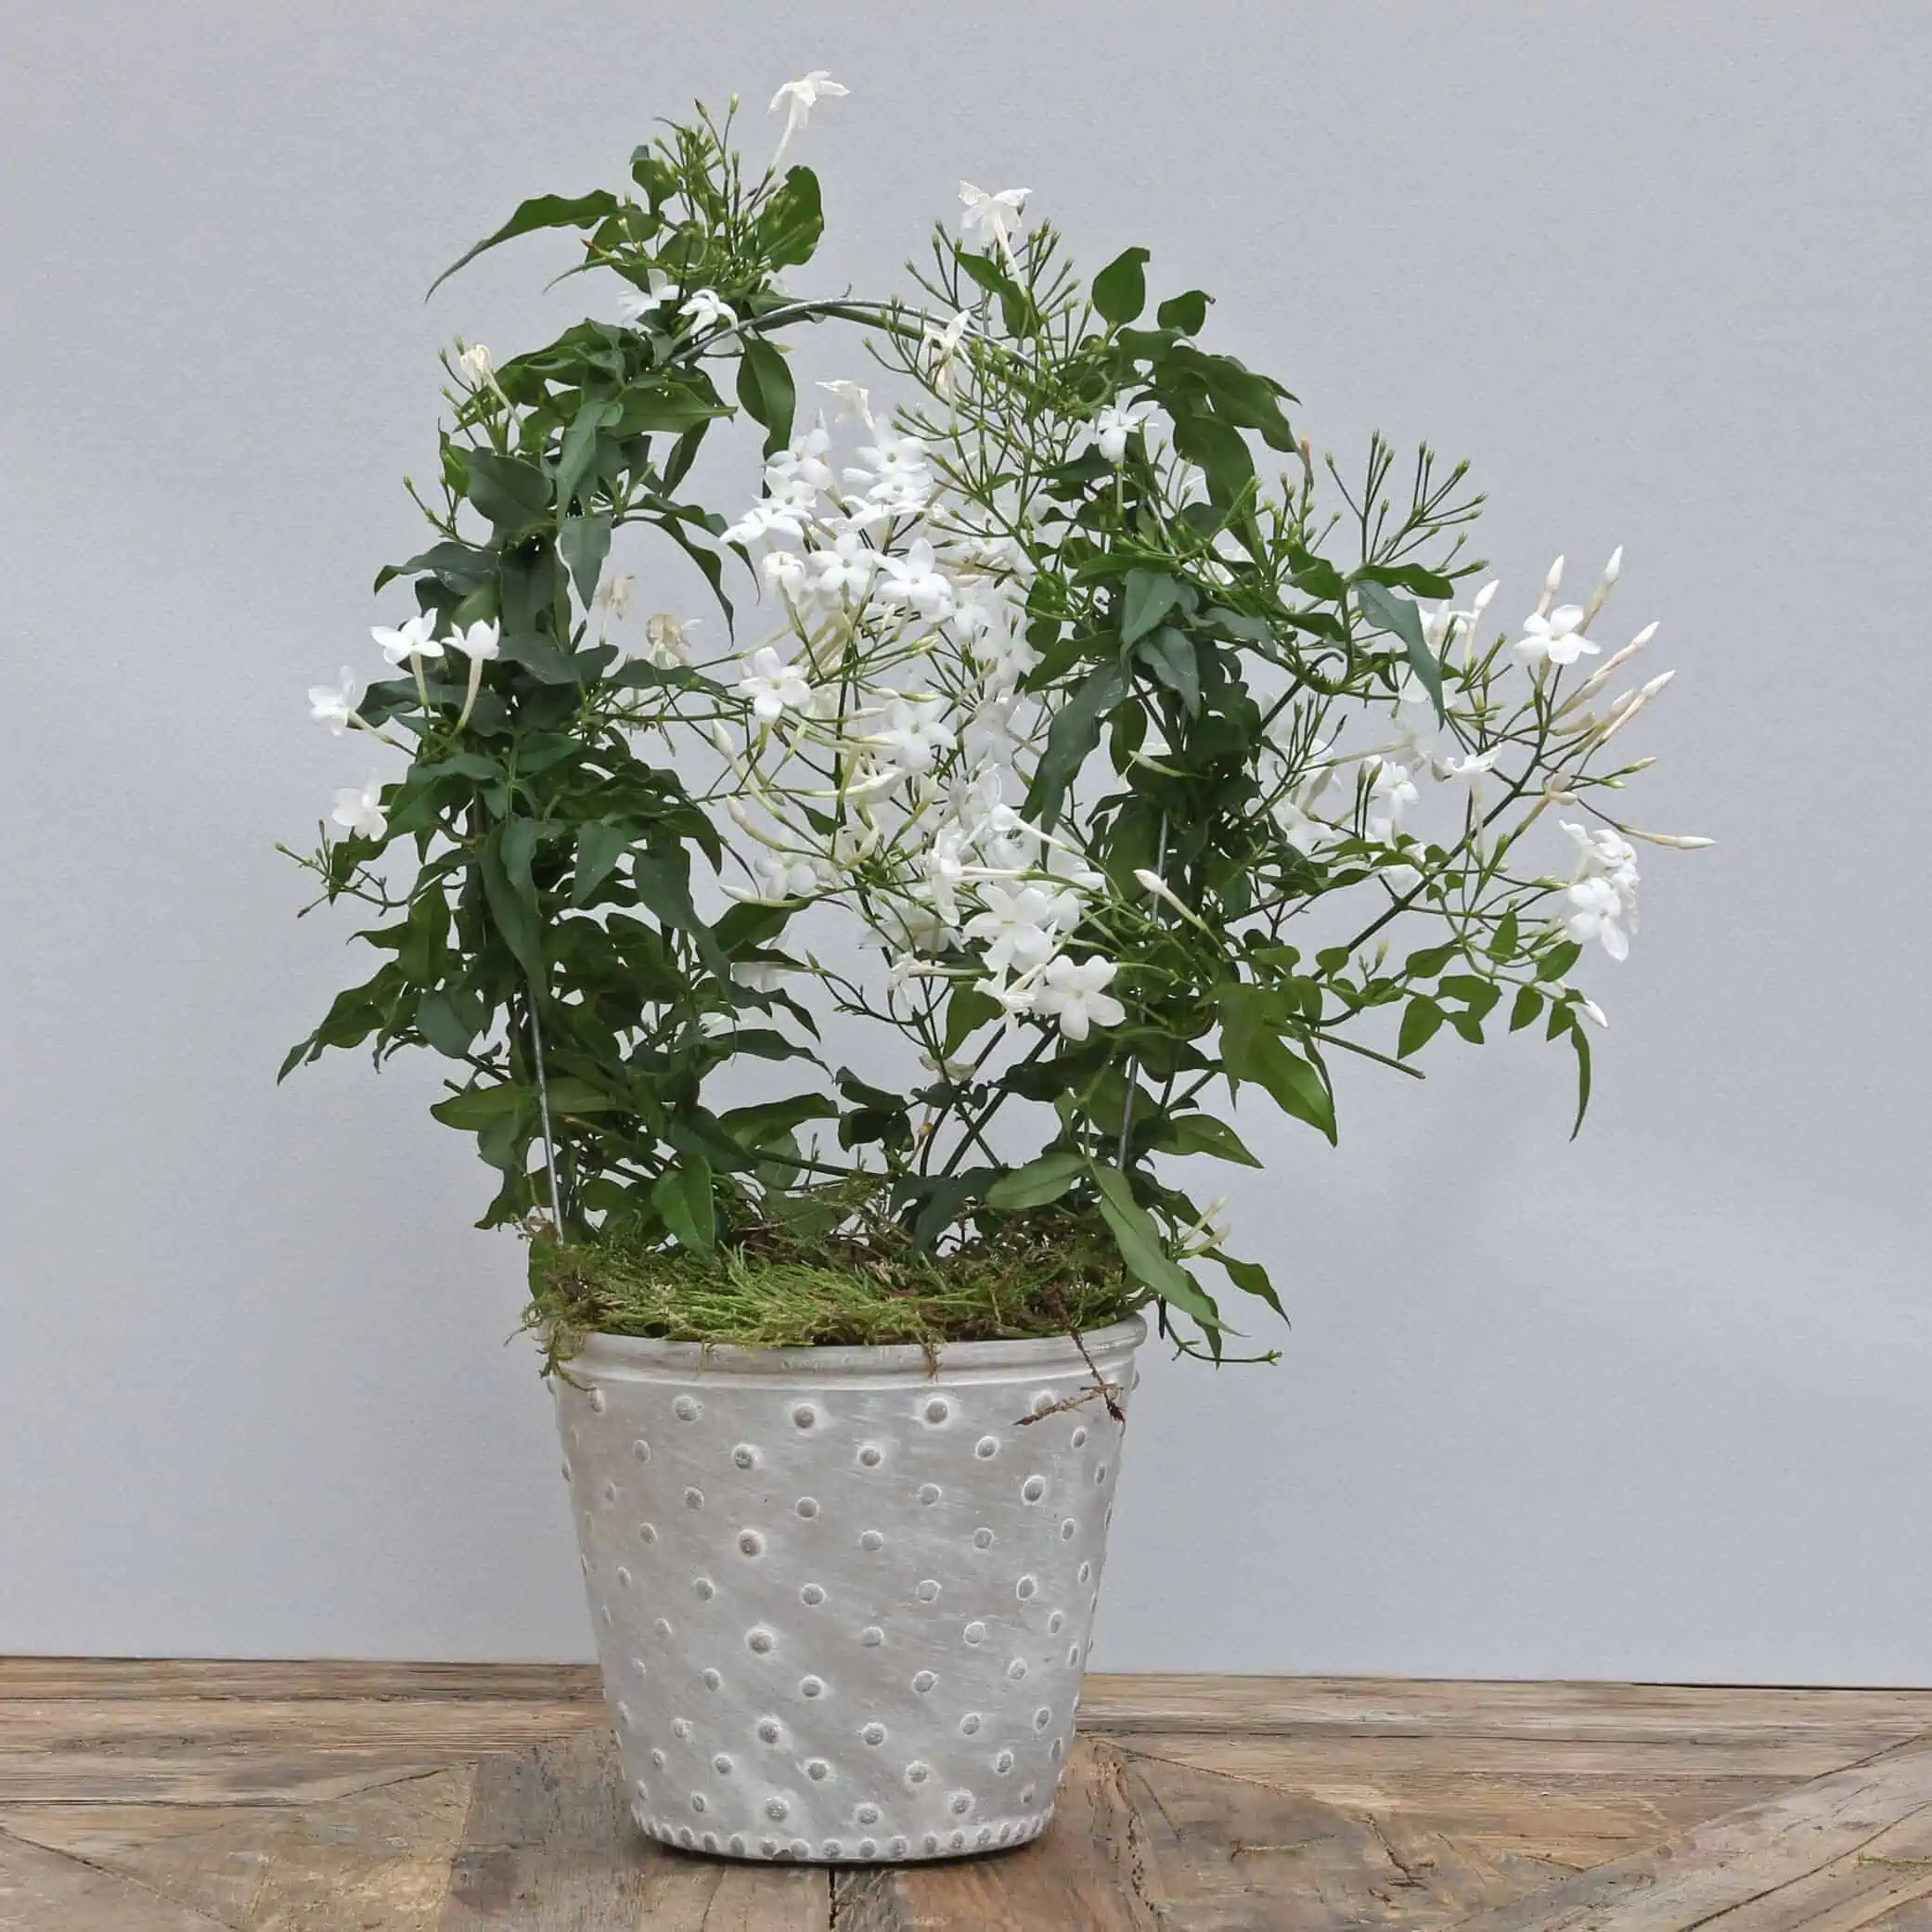 beautiful white plant with green foilage kept on a wooden table.